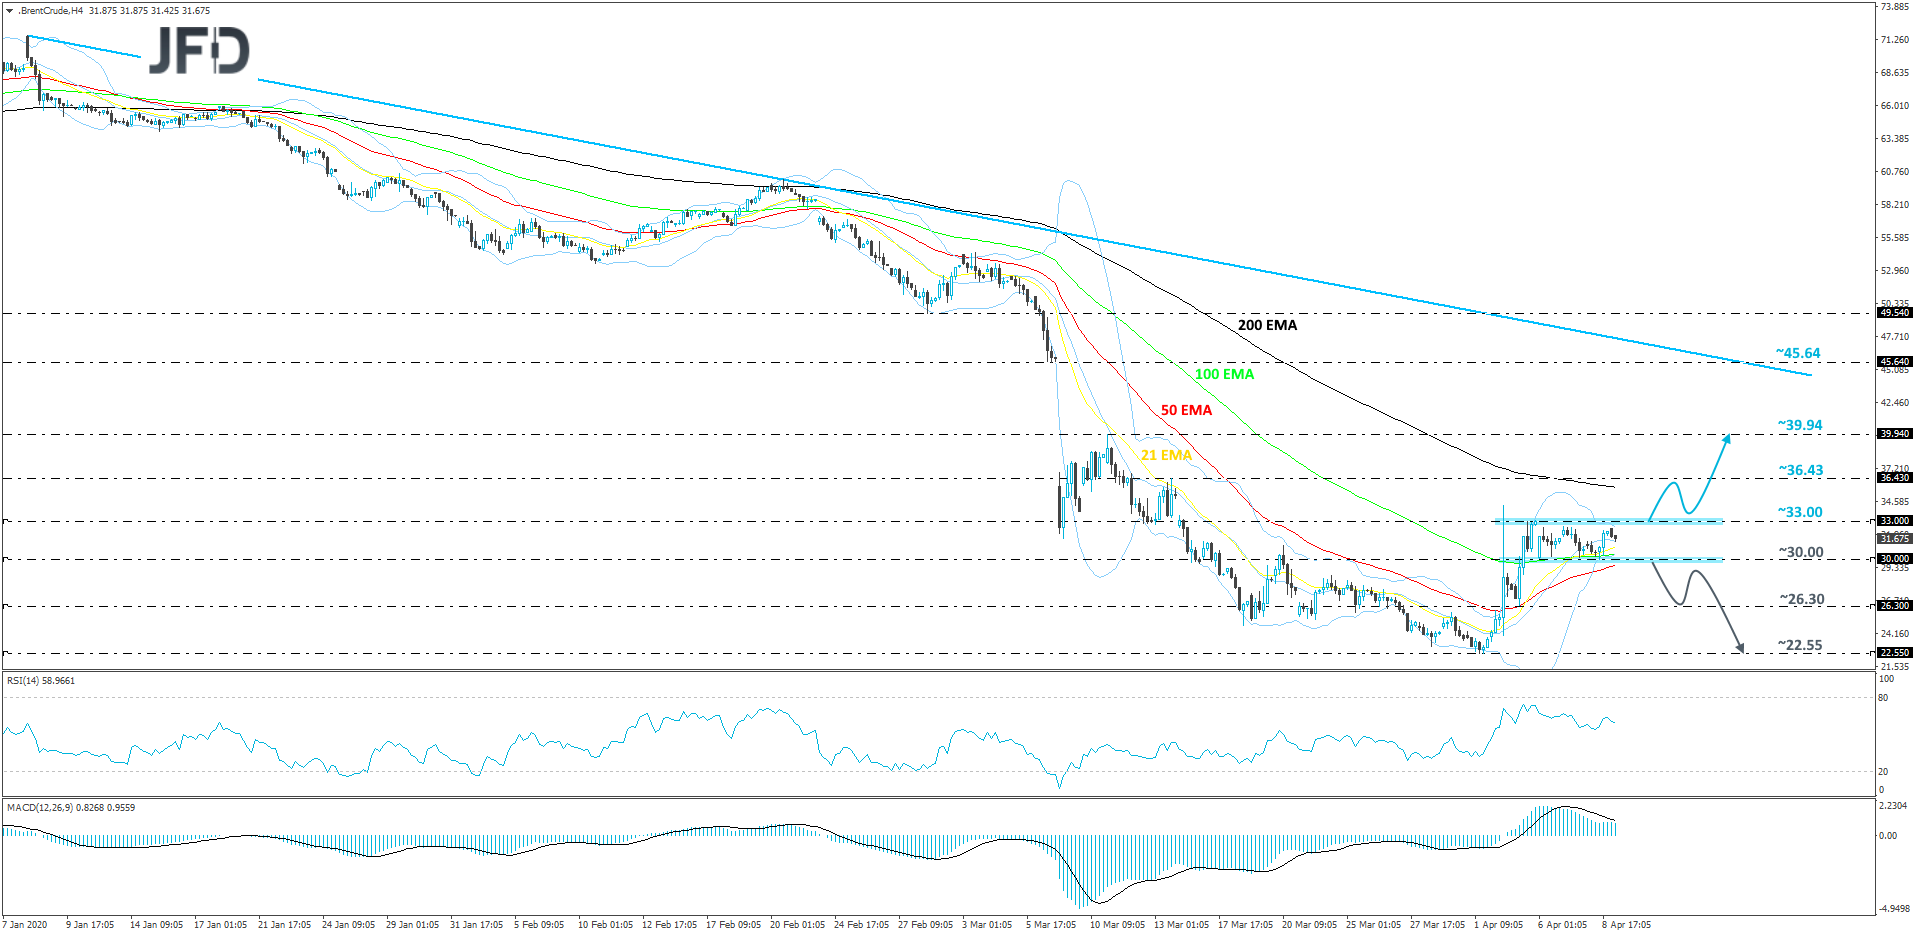 Brent crude oil 4-hour chart technical analysis